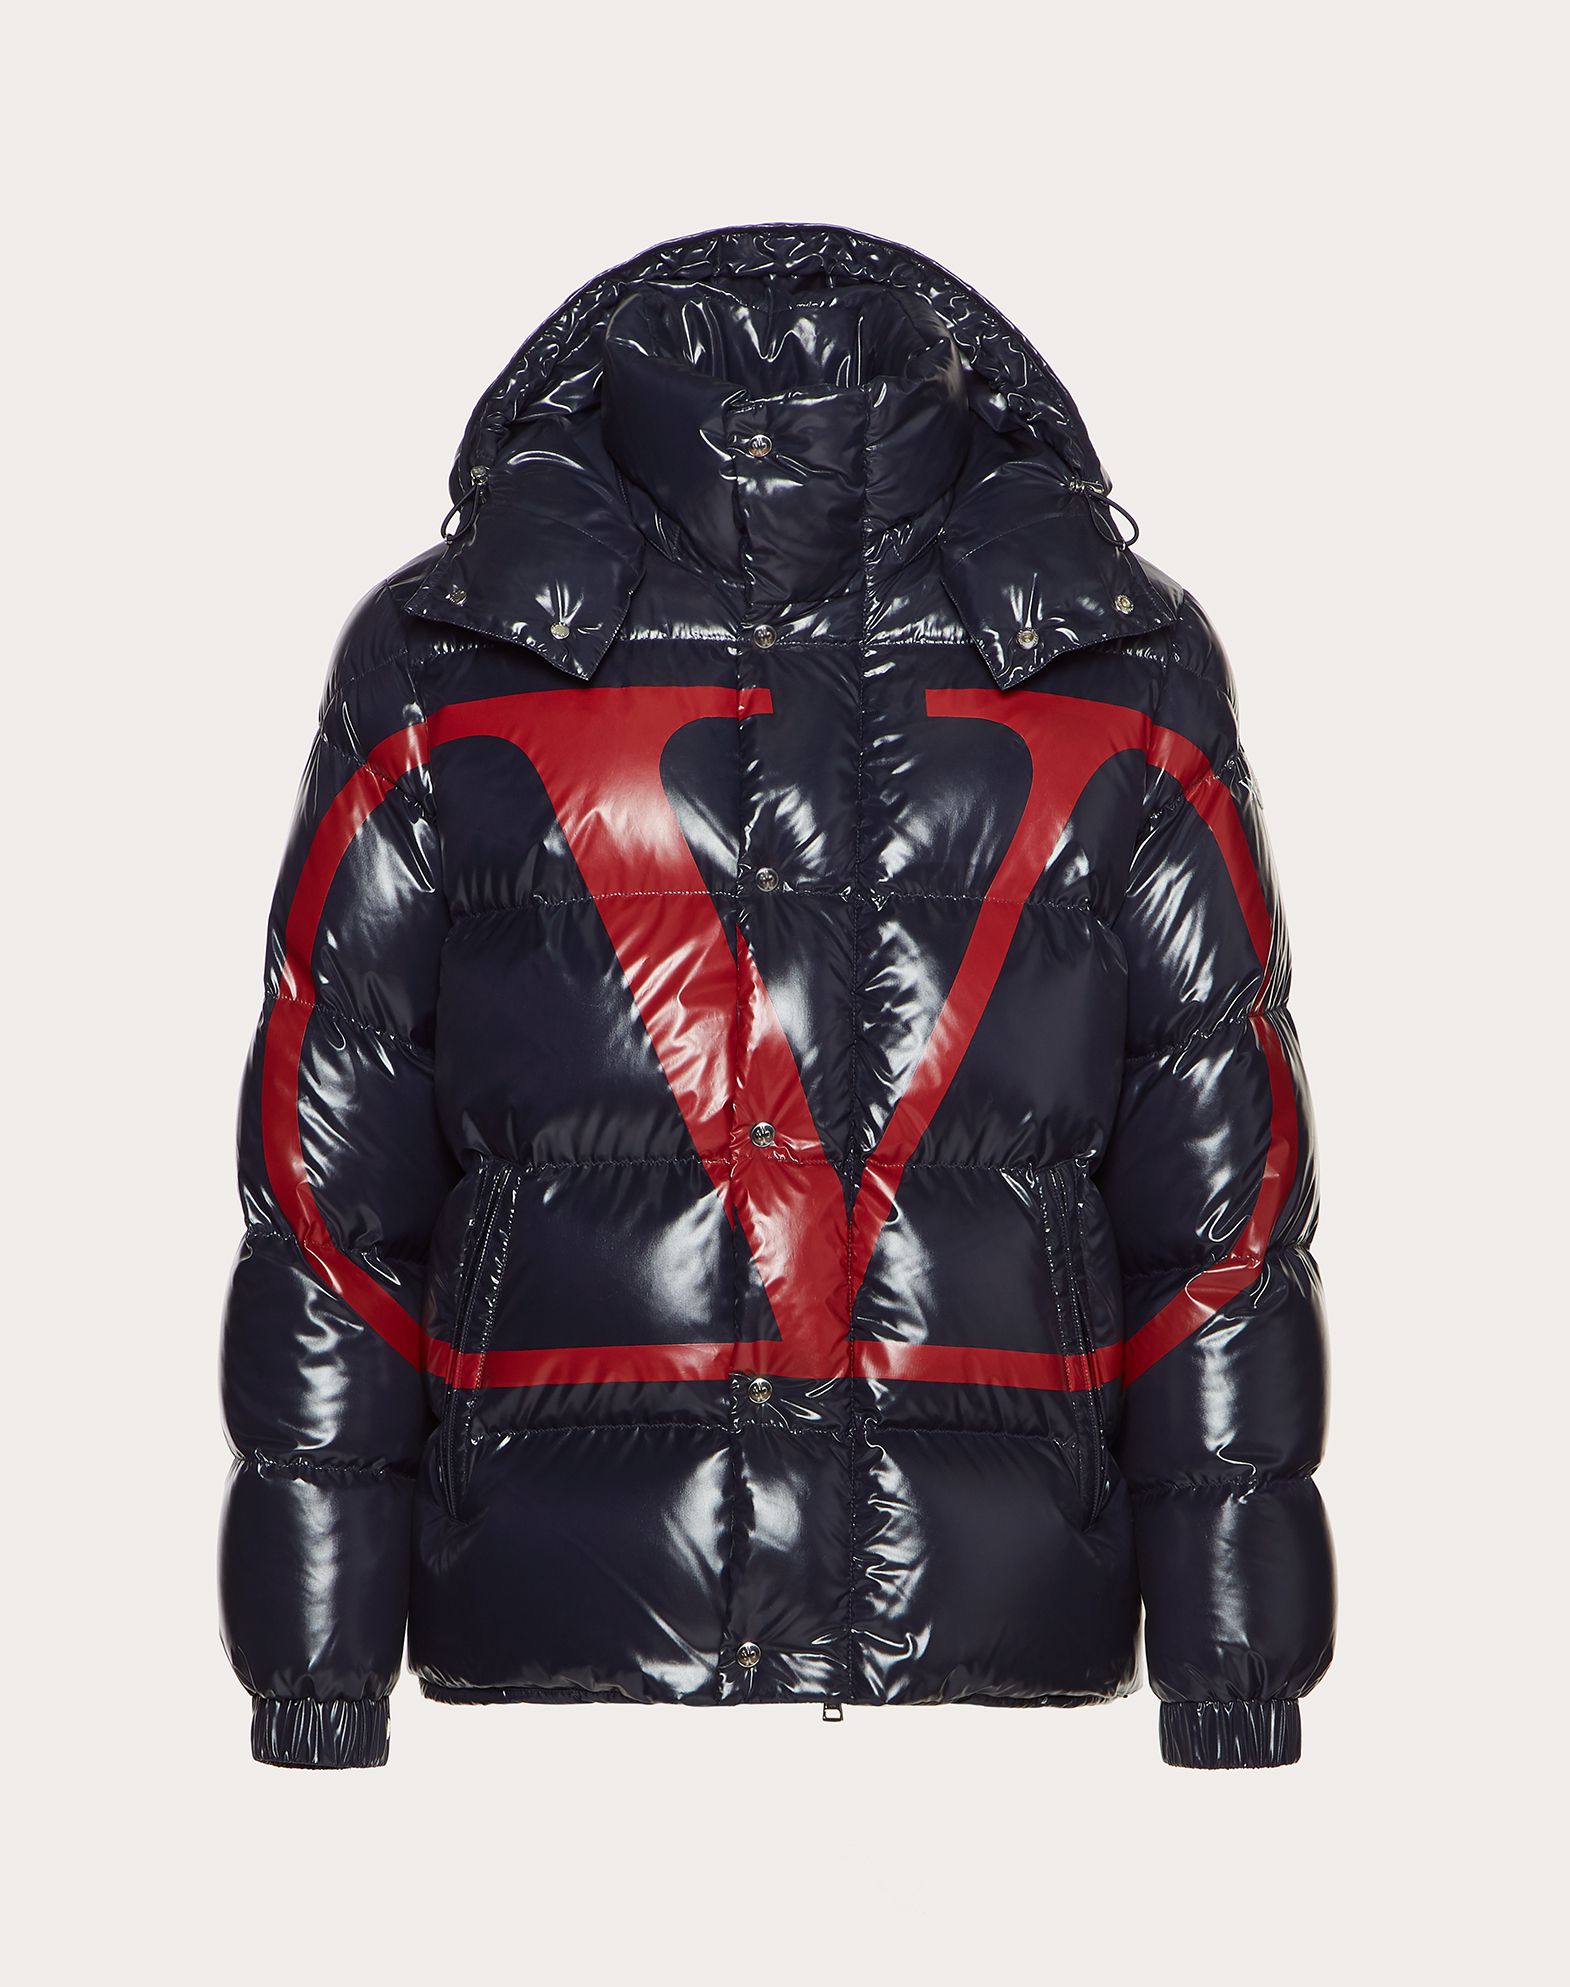 Moncler VLogo Signature Padded Jacket in Lacquered Nylon for Man | Valentino  Online Boutique